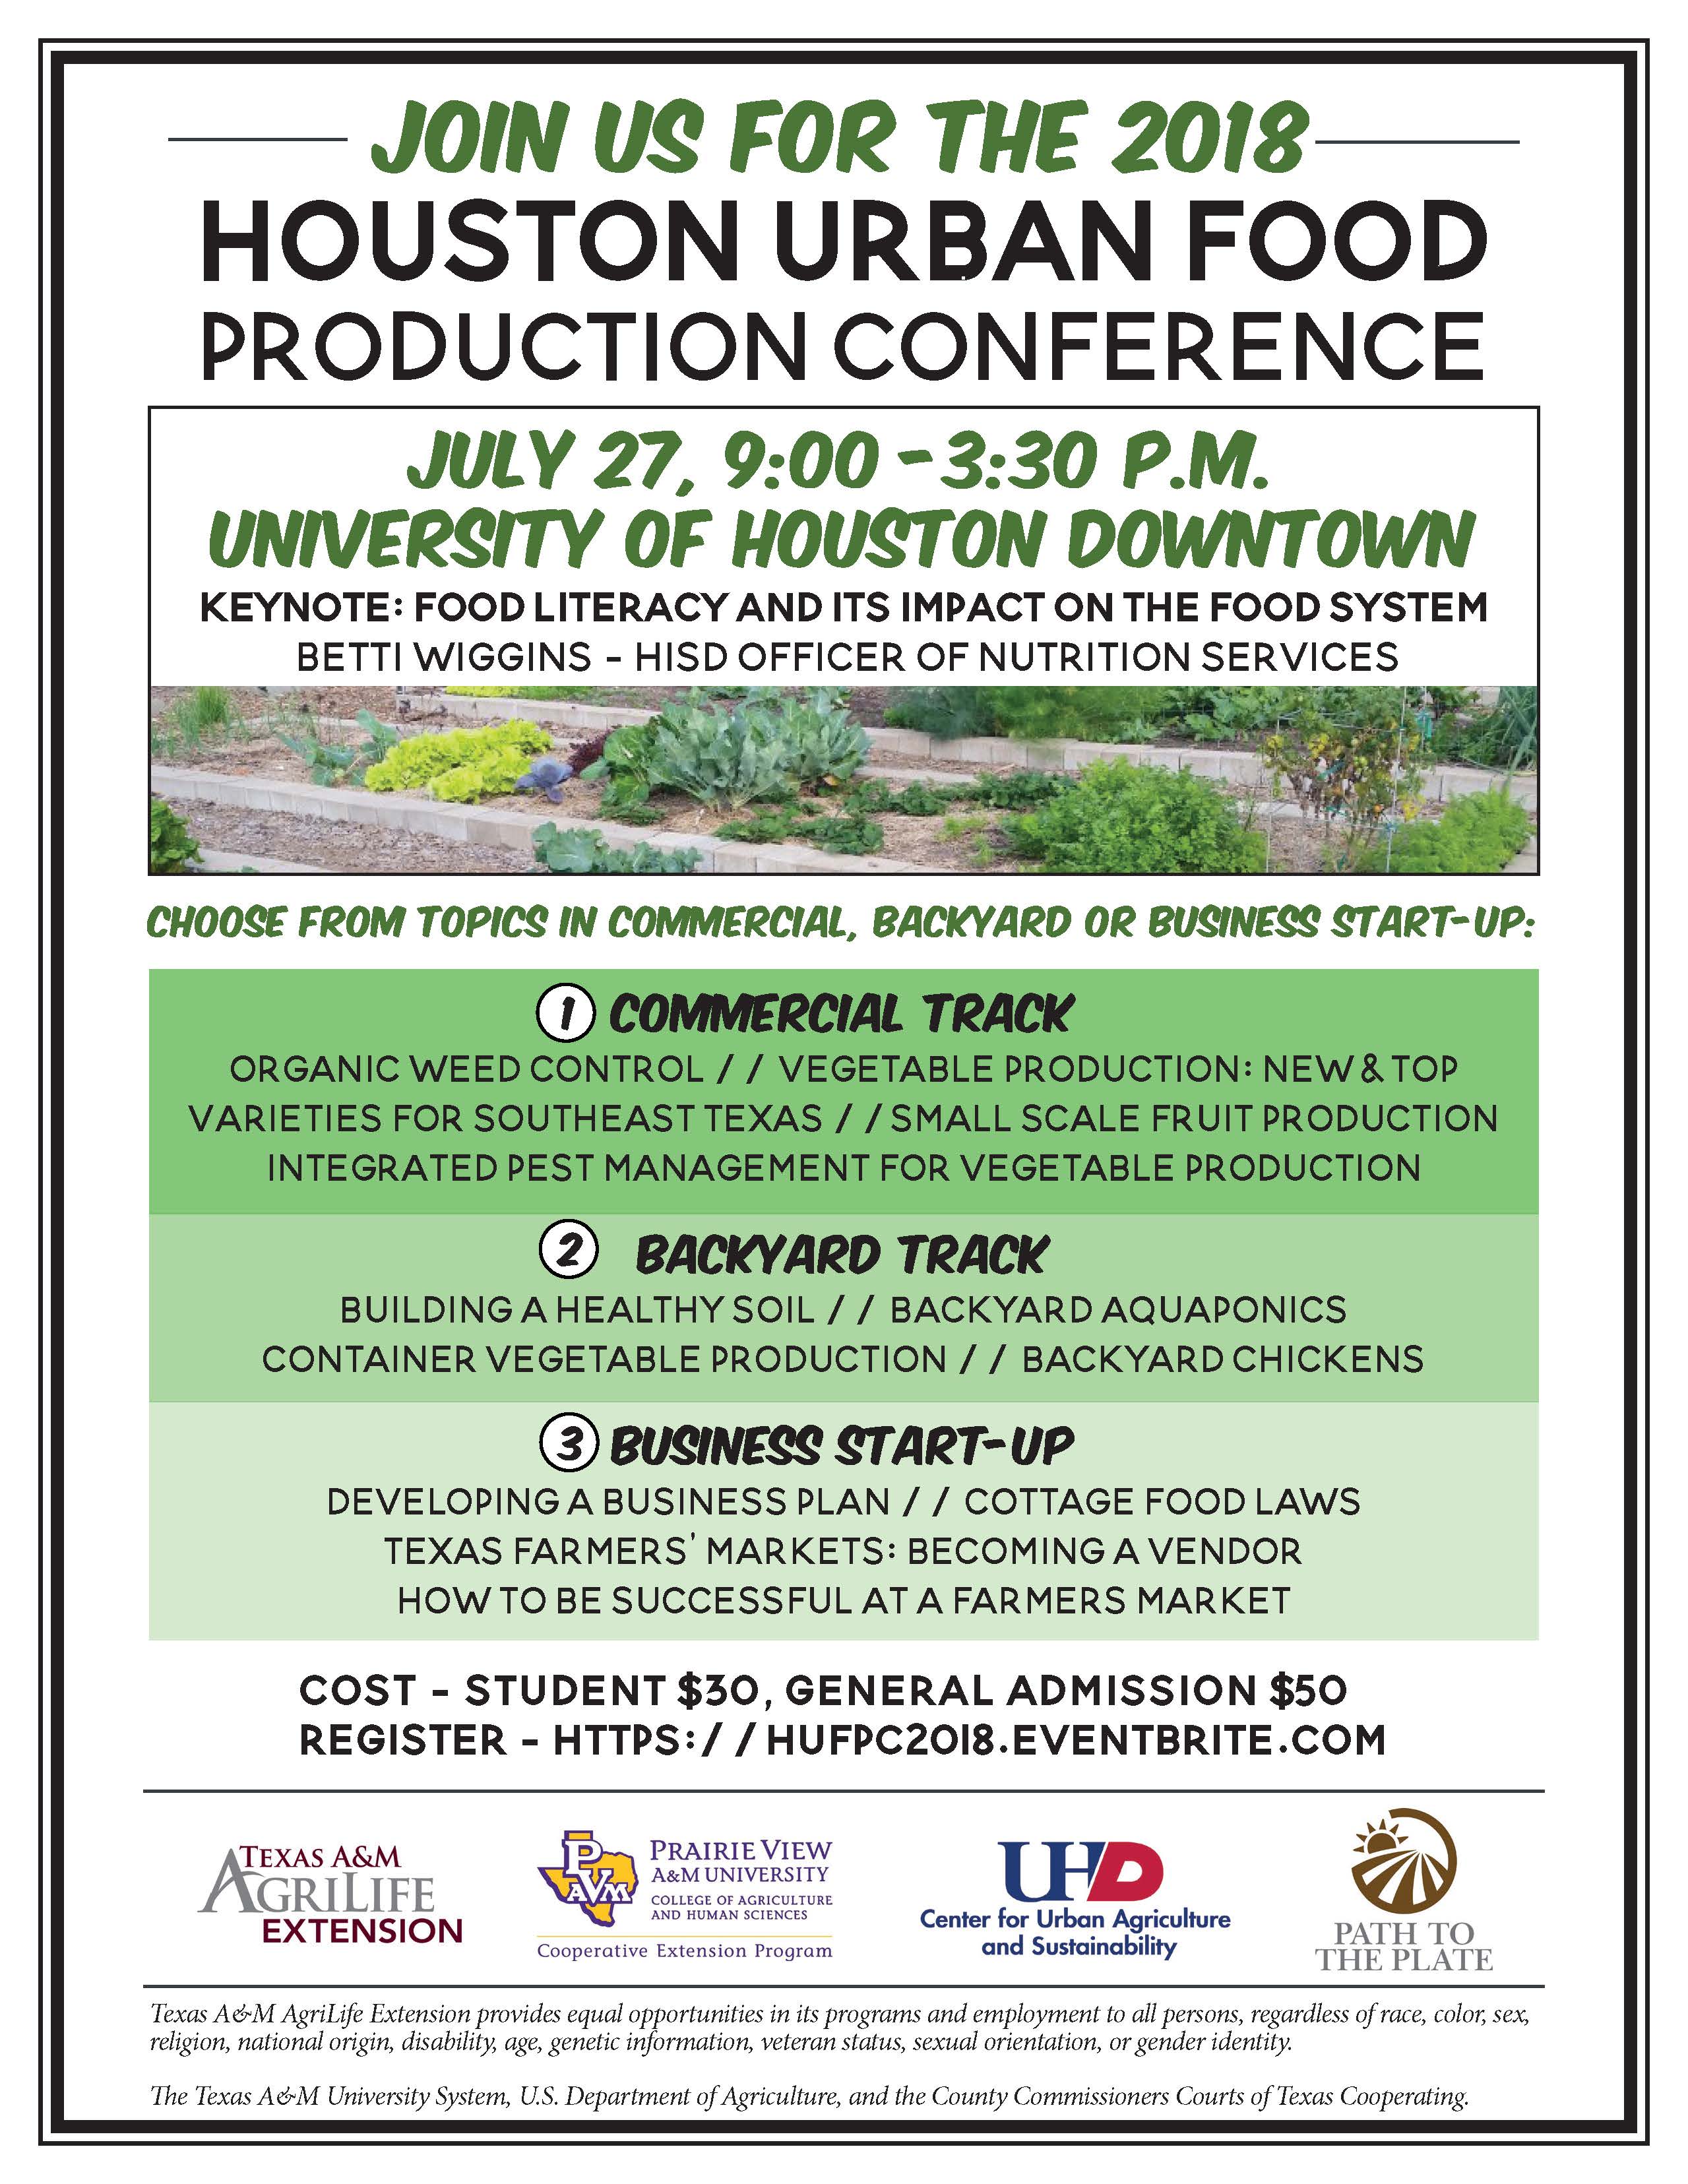 Join us at the 2018 Houston Urban Food Production Conference. You can choose from topics in commercial, backyard or business start-up topics. The conference is on July 27, 2018 at the University of Houston Downtown. Cost is $30 for students, $50 for General Admission. To register go to https://hufpc2018.eventbrite.com